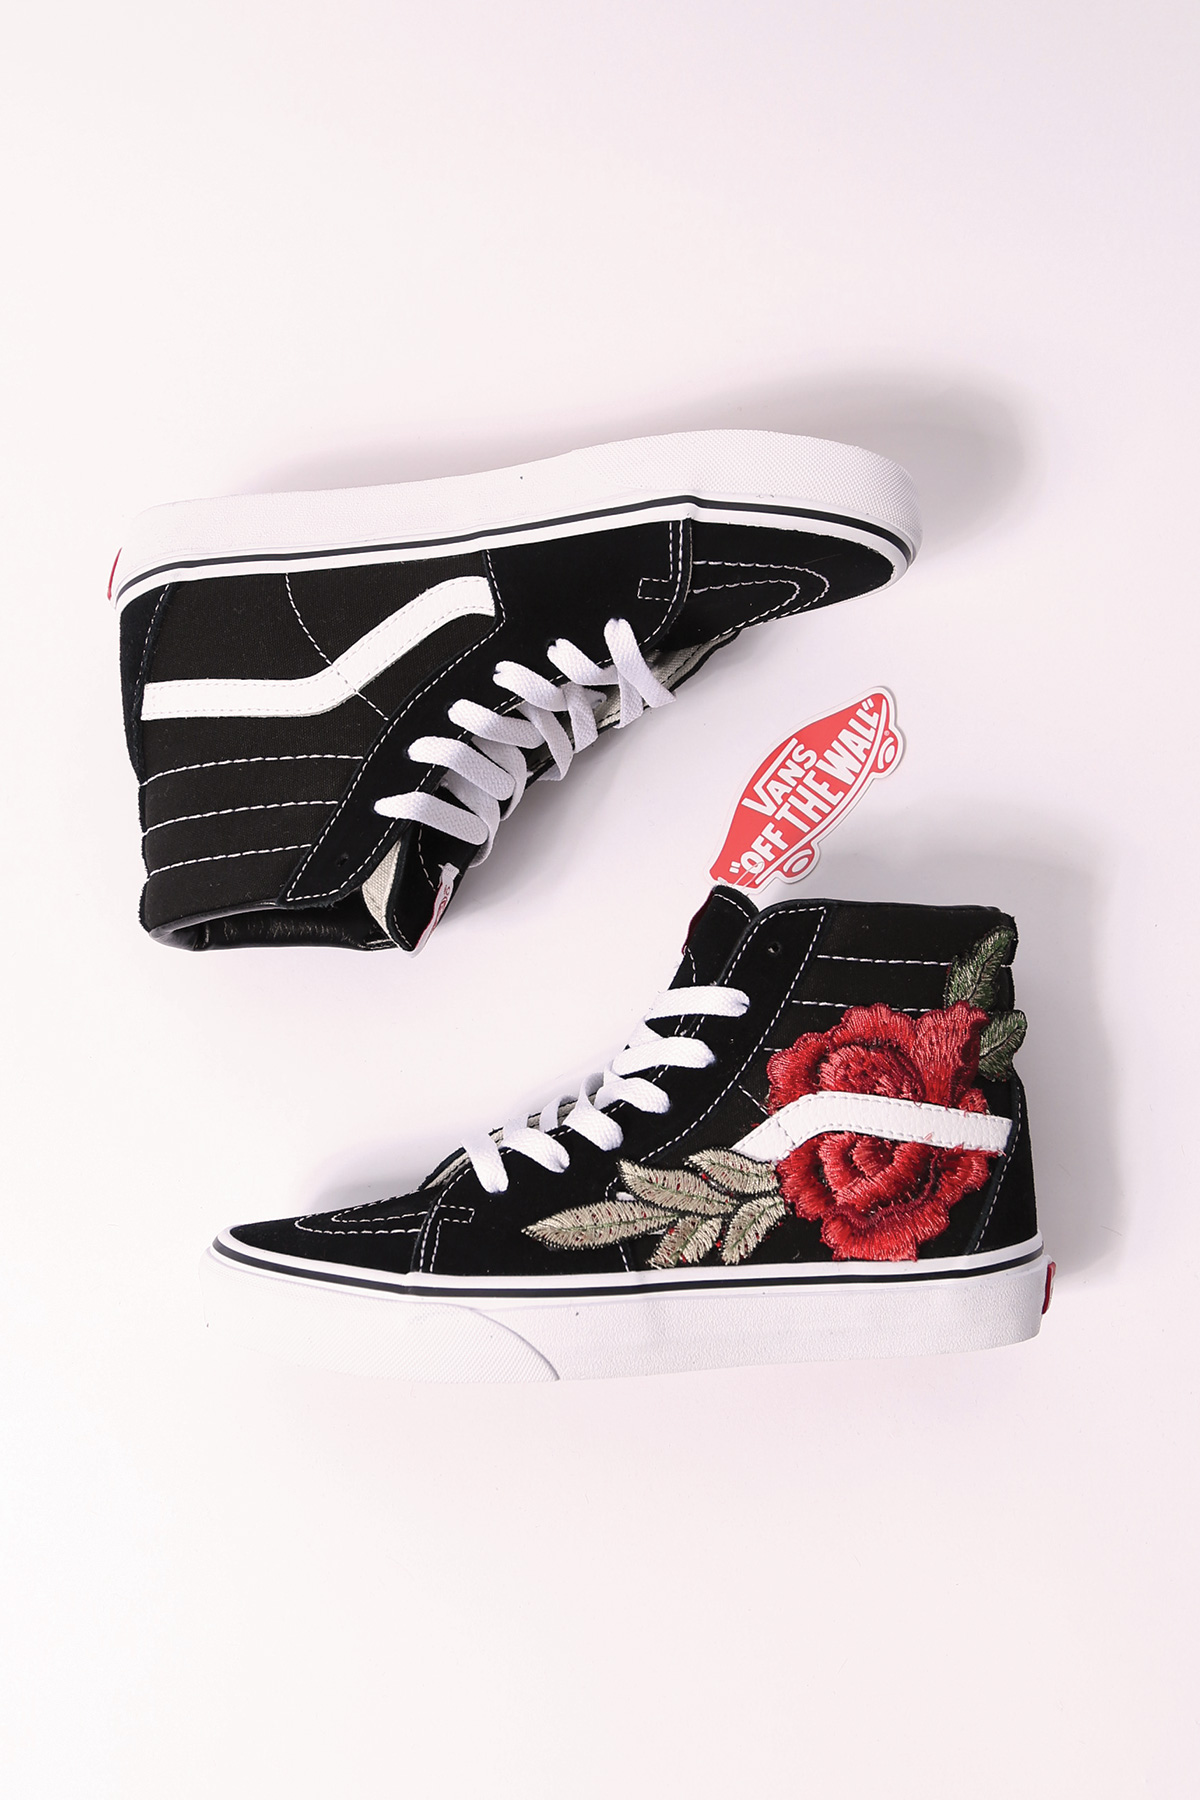 vans with a rose